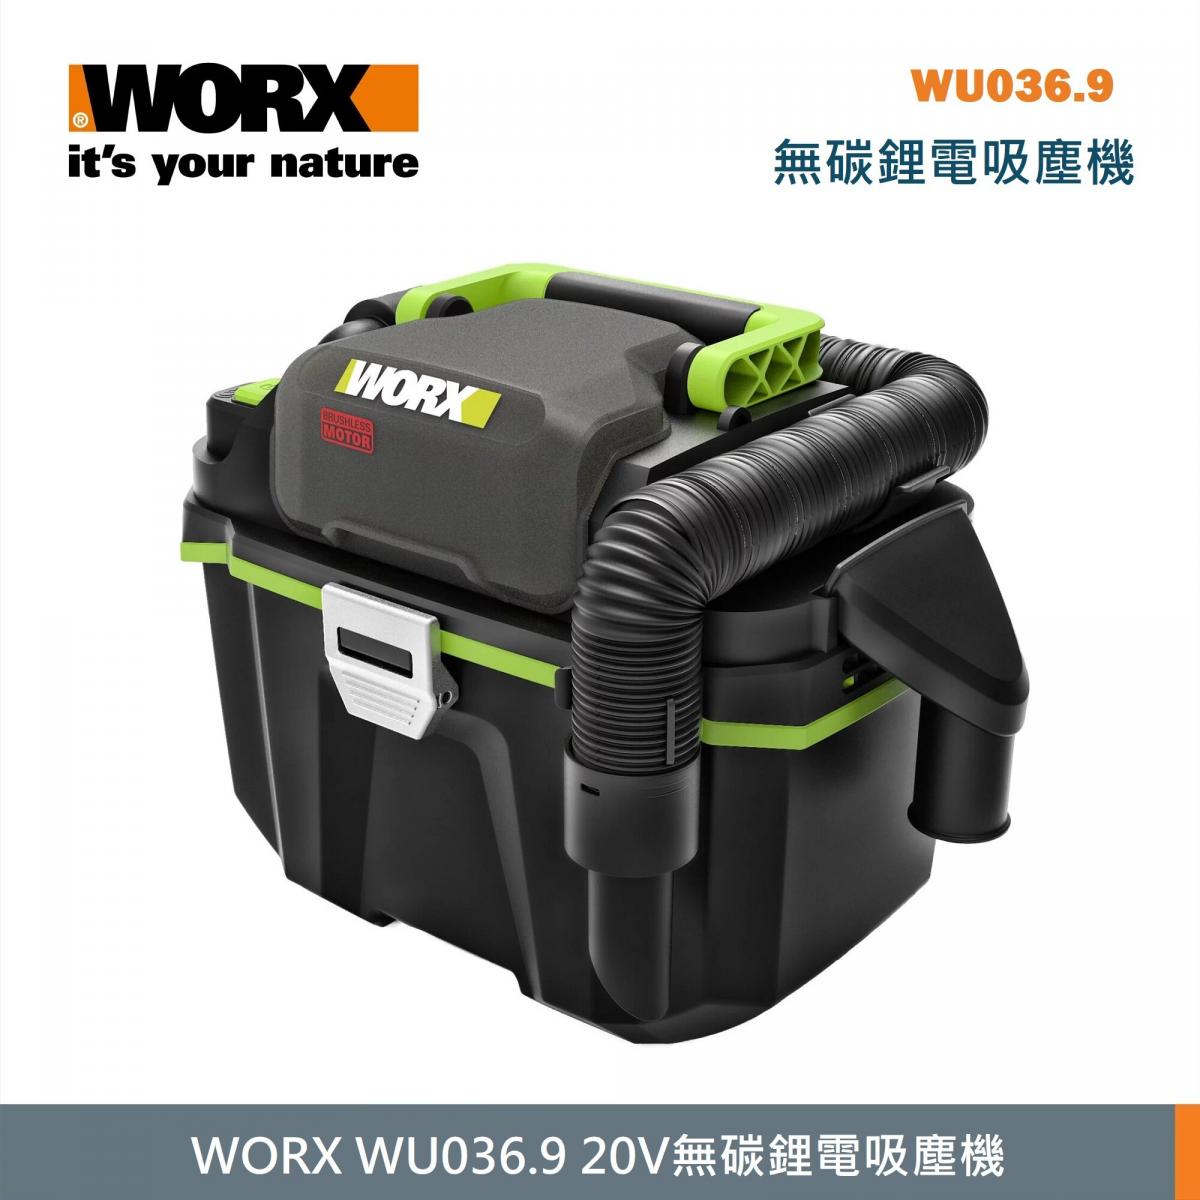 WORX - WU036.9 20V carbon-free lithium vacuum cleaner (clean body) | Wet and dry vacuum cleaner